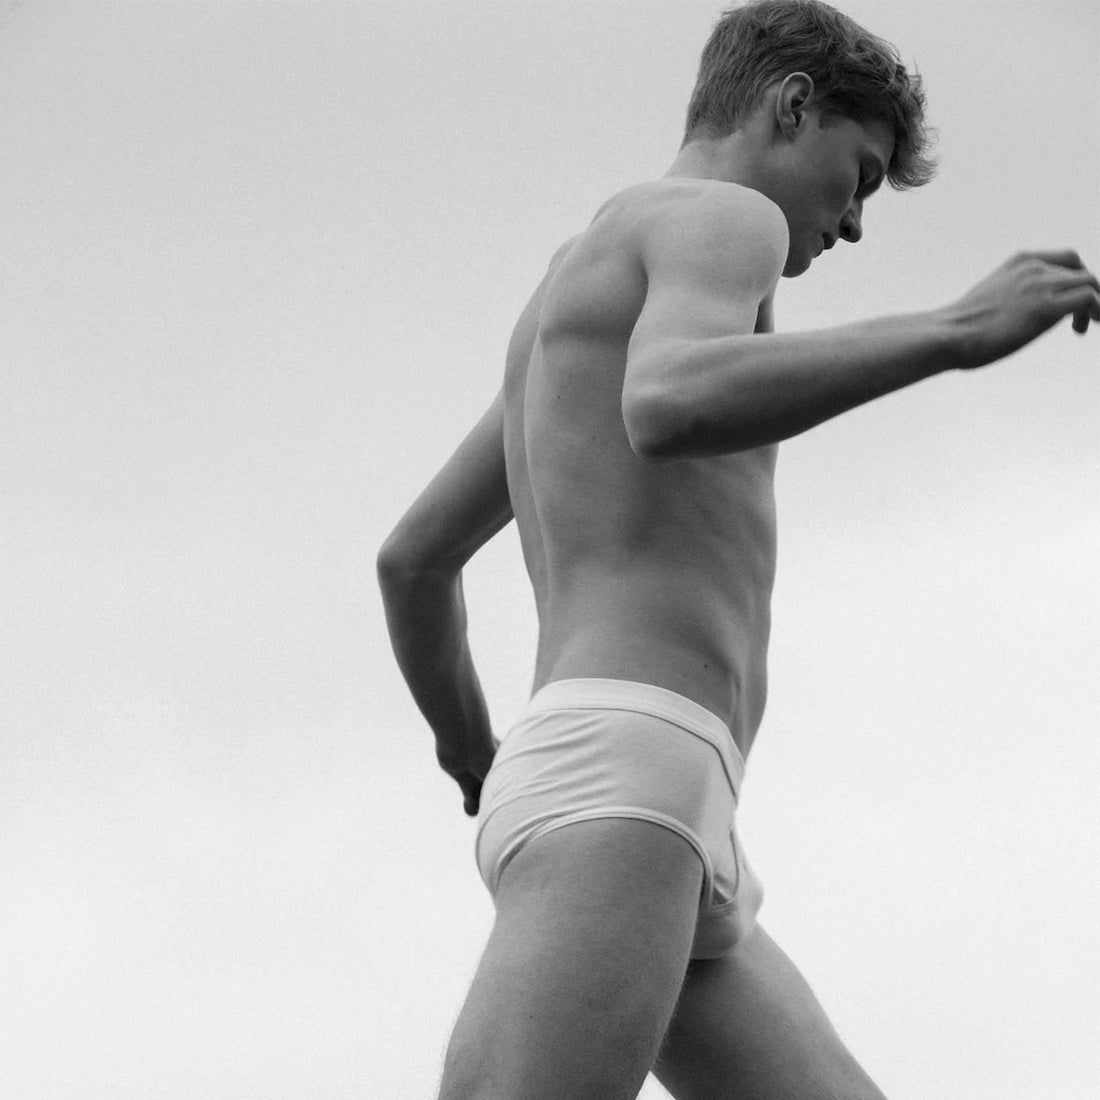 Person in white underwear is captured in a low-angle shot, seemingly in motion against a cloudy sky background.